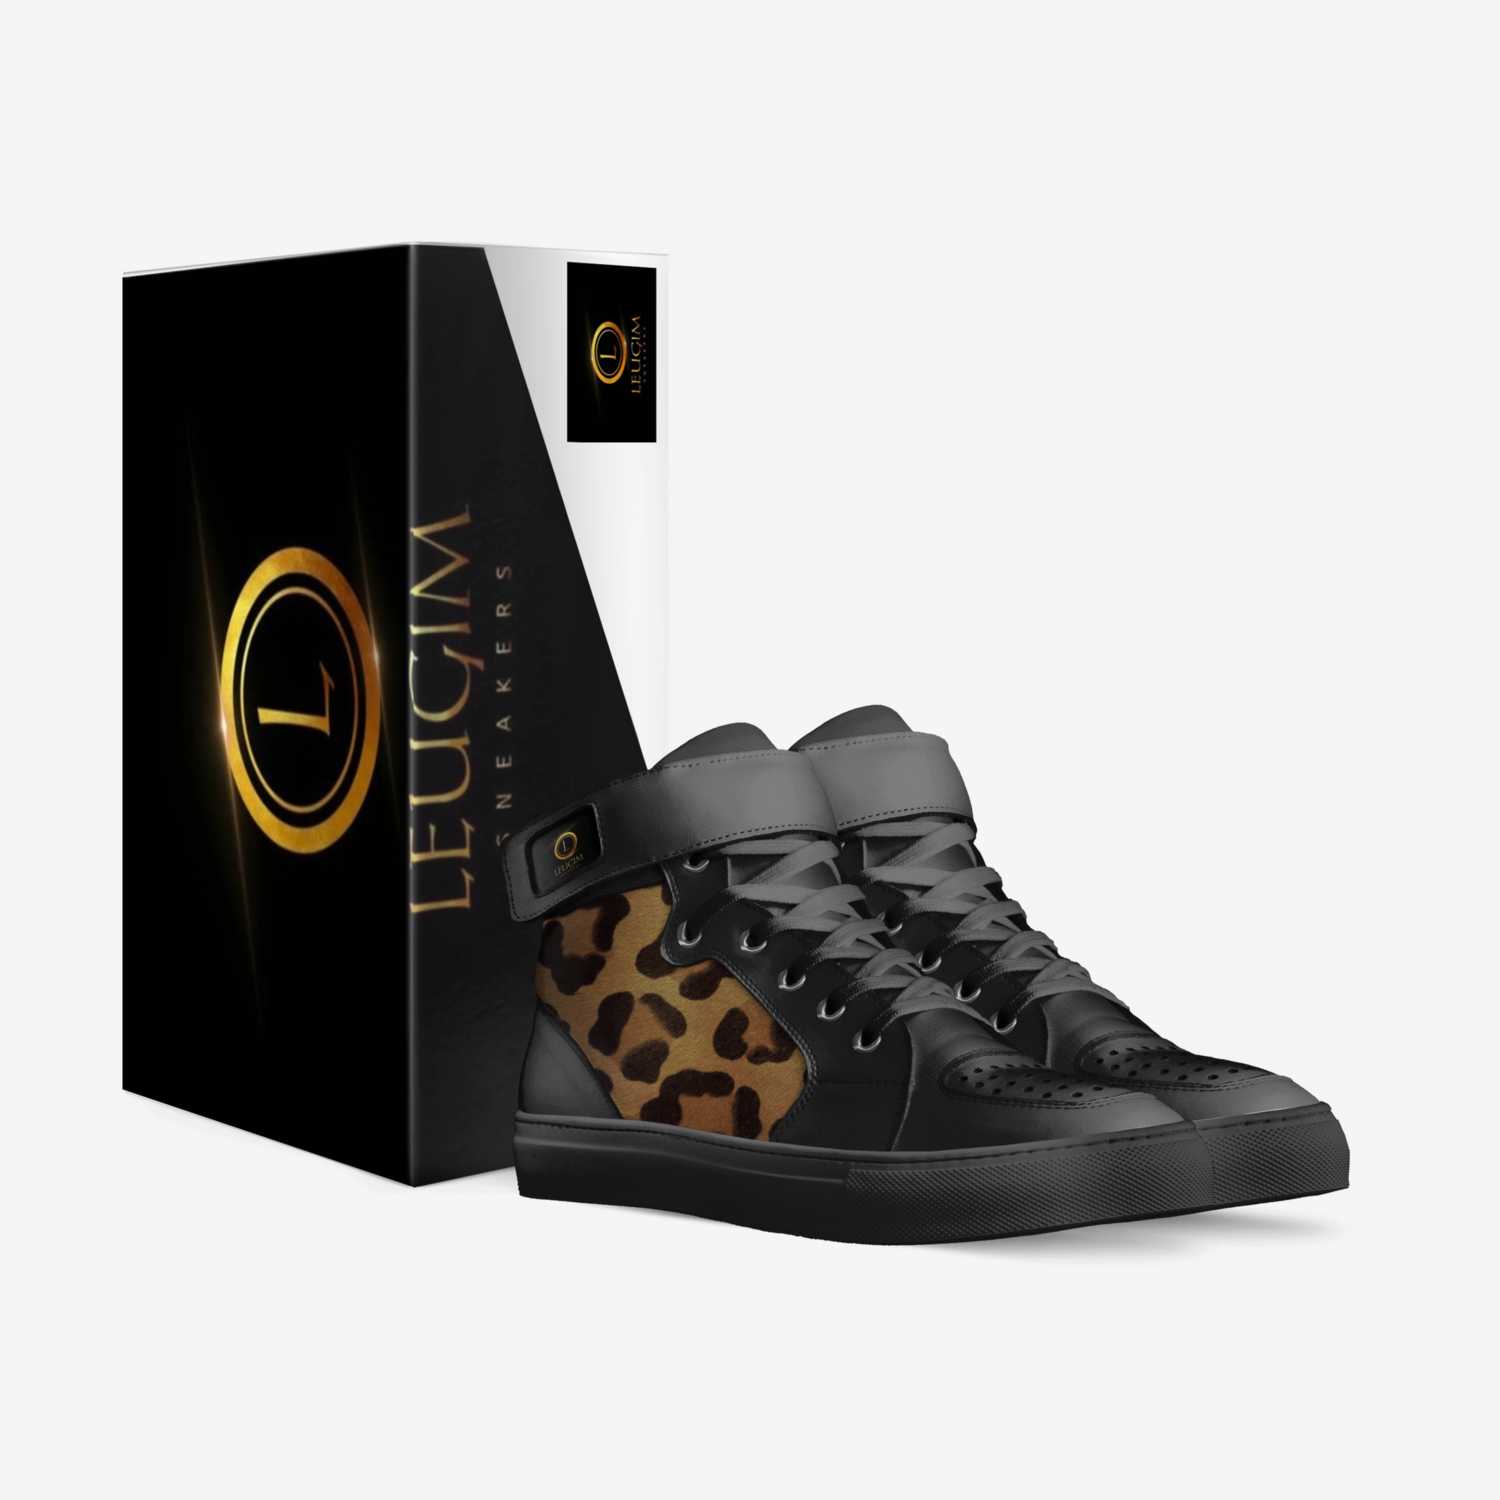 LEUGIM SWAG custom made in Italy shoes by Miguel Gonzalez | Box view